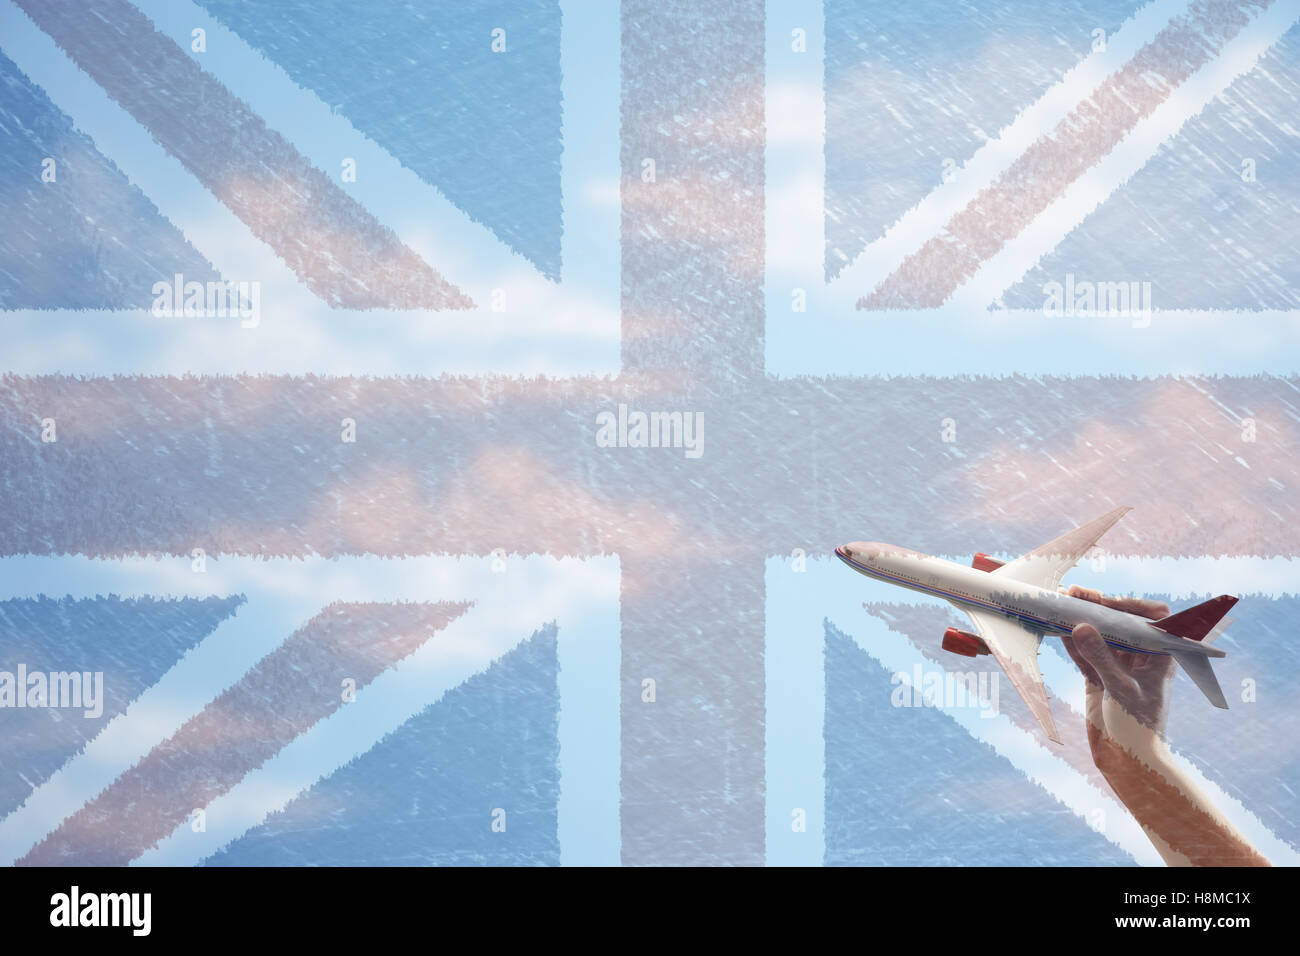 Toy plane flying in front of Union Jack flag Stock Photo